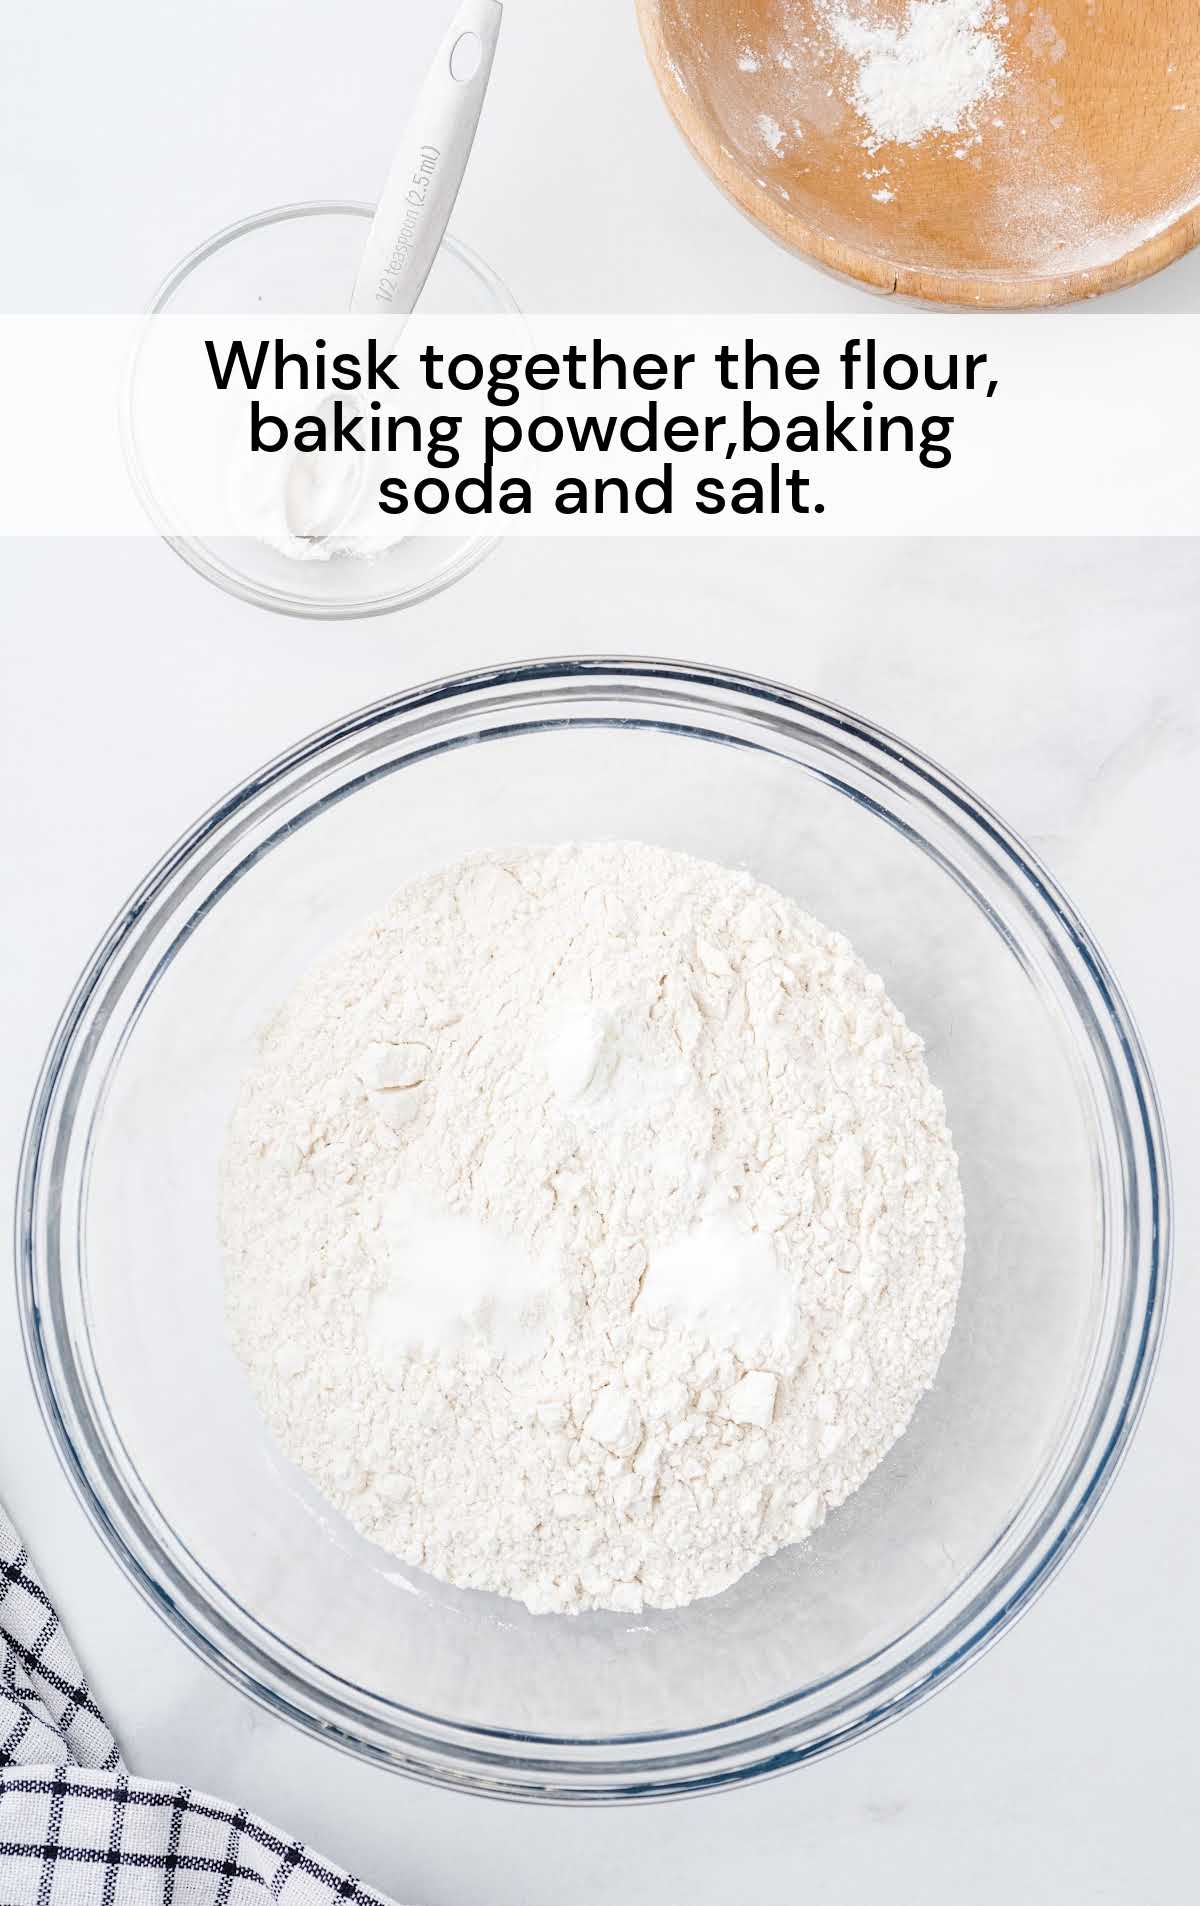 flour, baking powder, baking soda and salt whisked together in a bowl